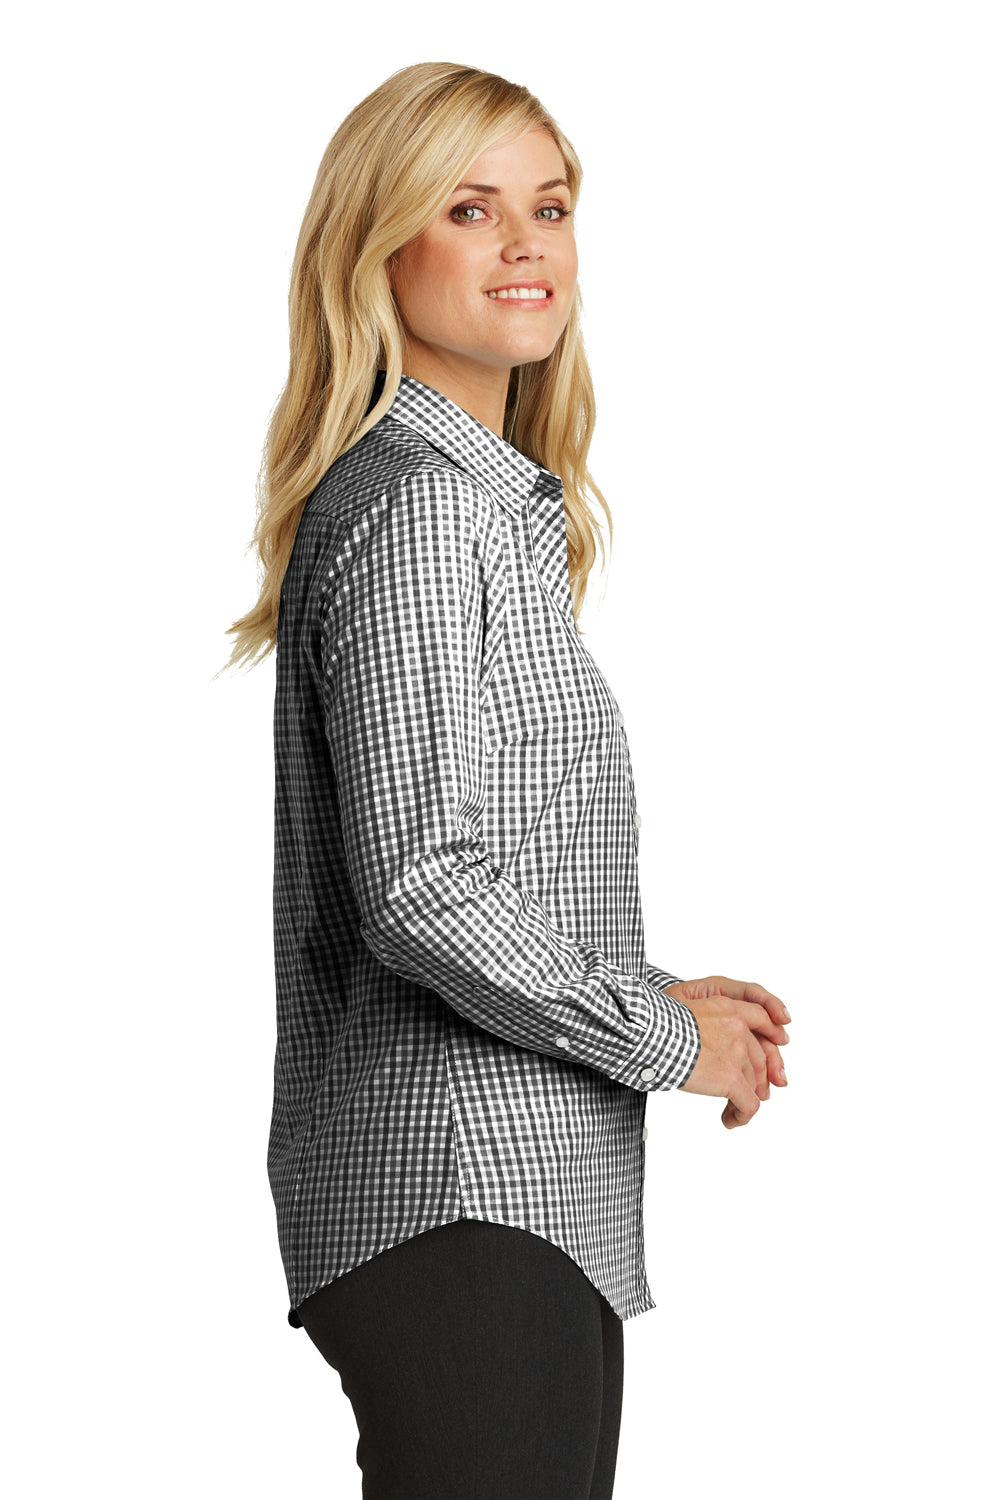 Port Authority L654 Womens Easy Care Wrinkle Resistant Long Sleeve Button Down Shirt Black/Charcoal Grey Side